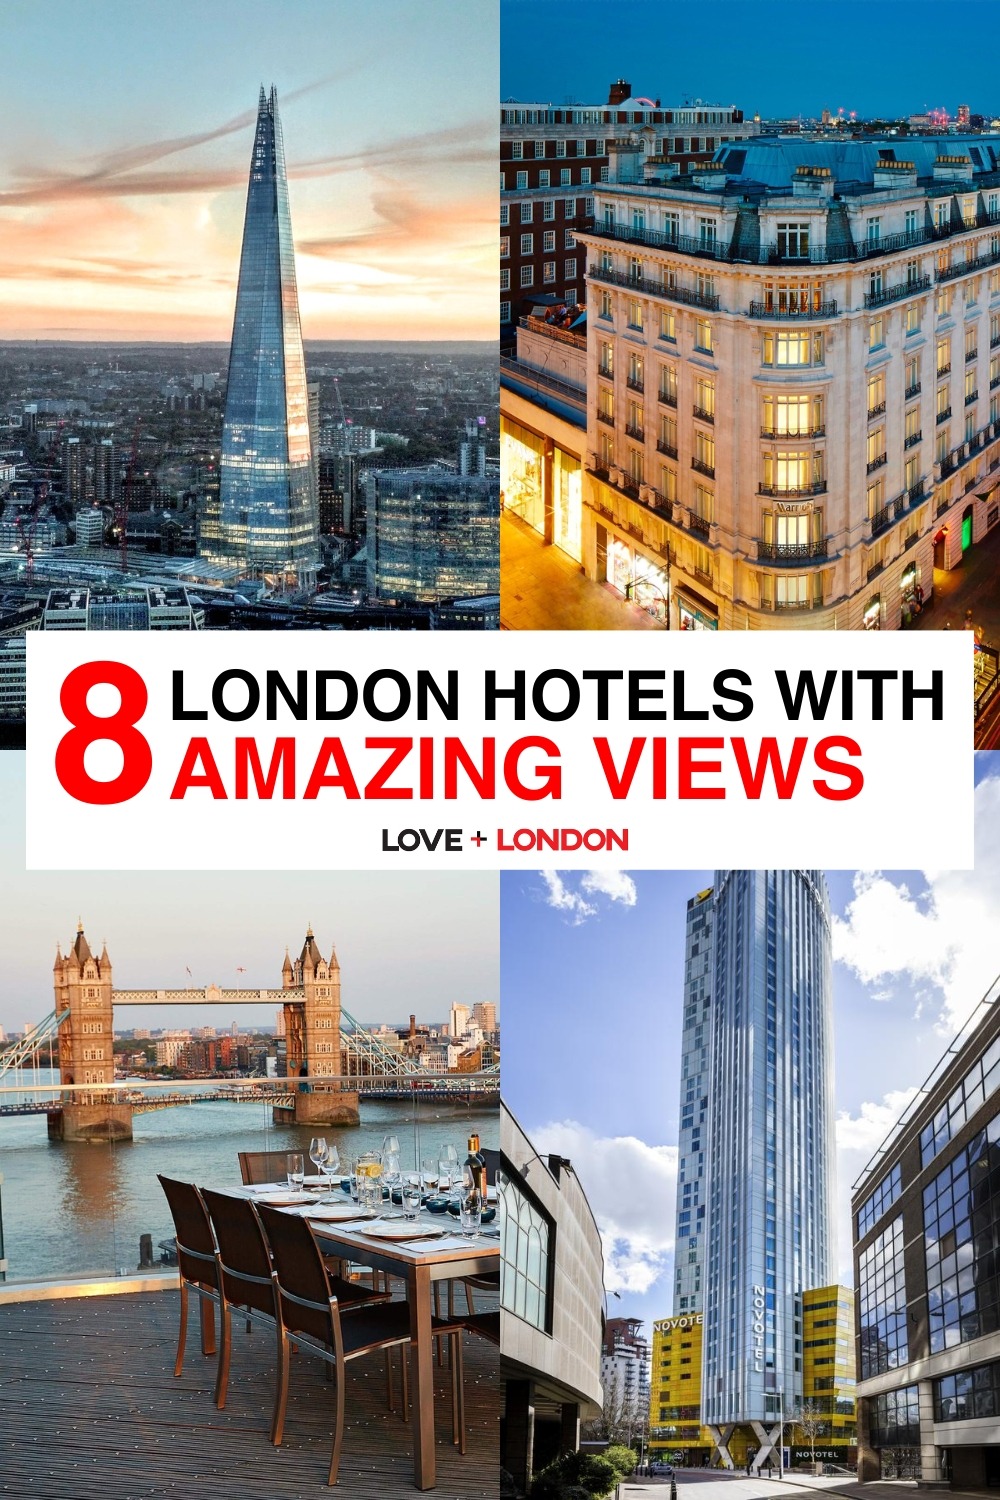 London Hotels with Amazing Views